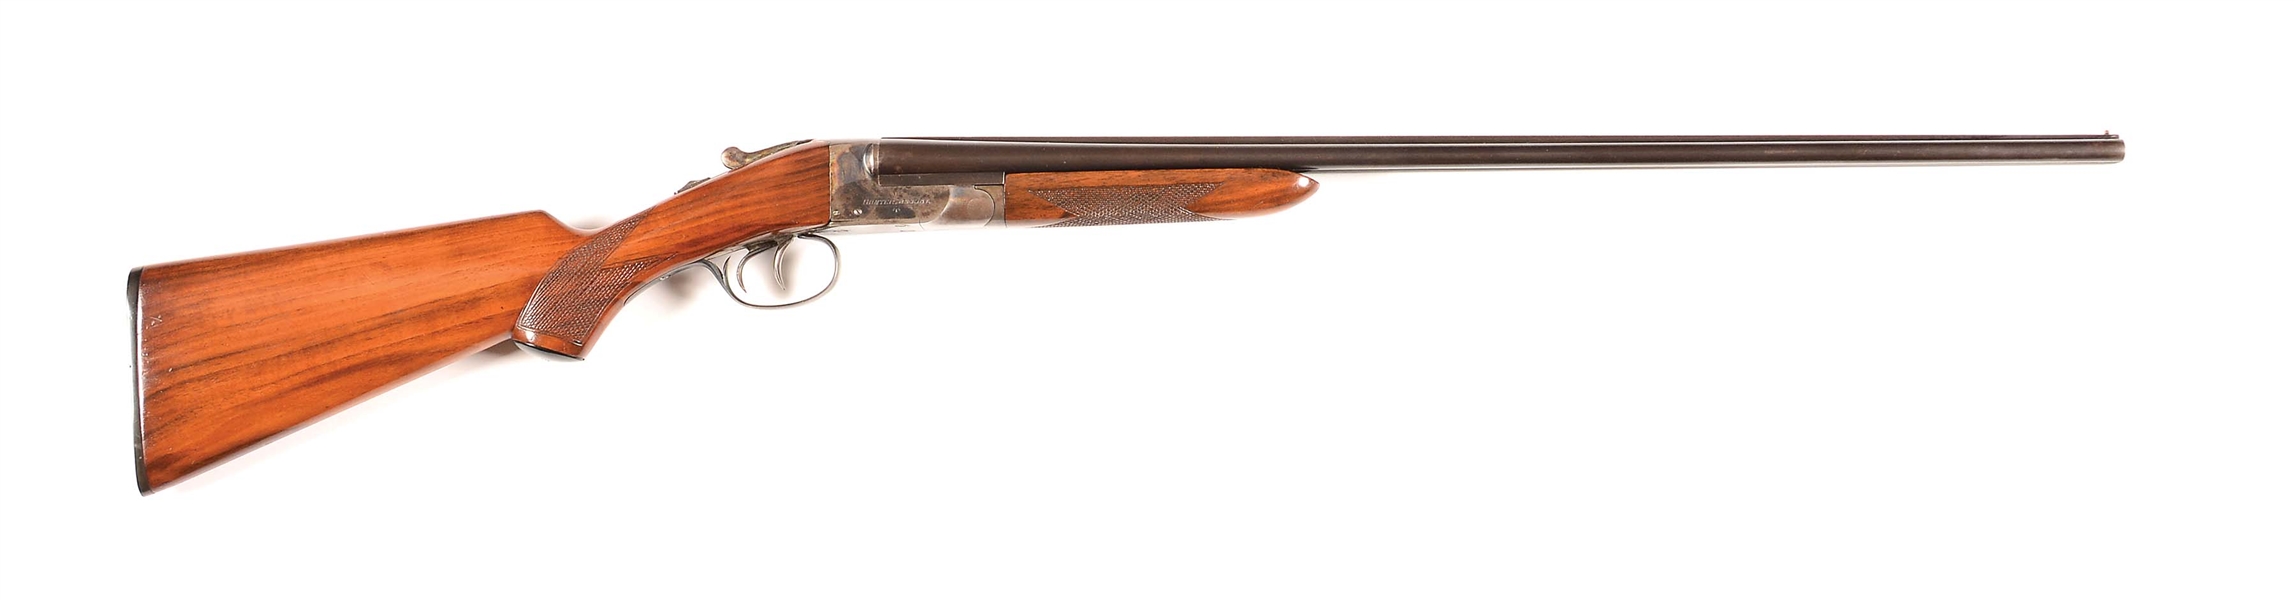 (C) HUNTER ARMS CO .410 BORE HUNTER SPECIAL SIDE BY SIDE SHOTGUN.